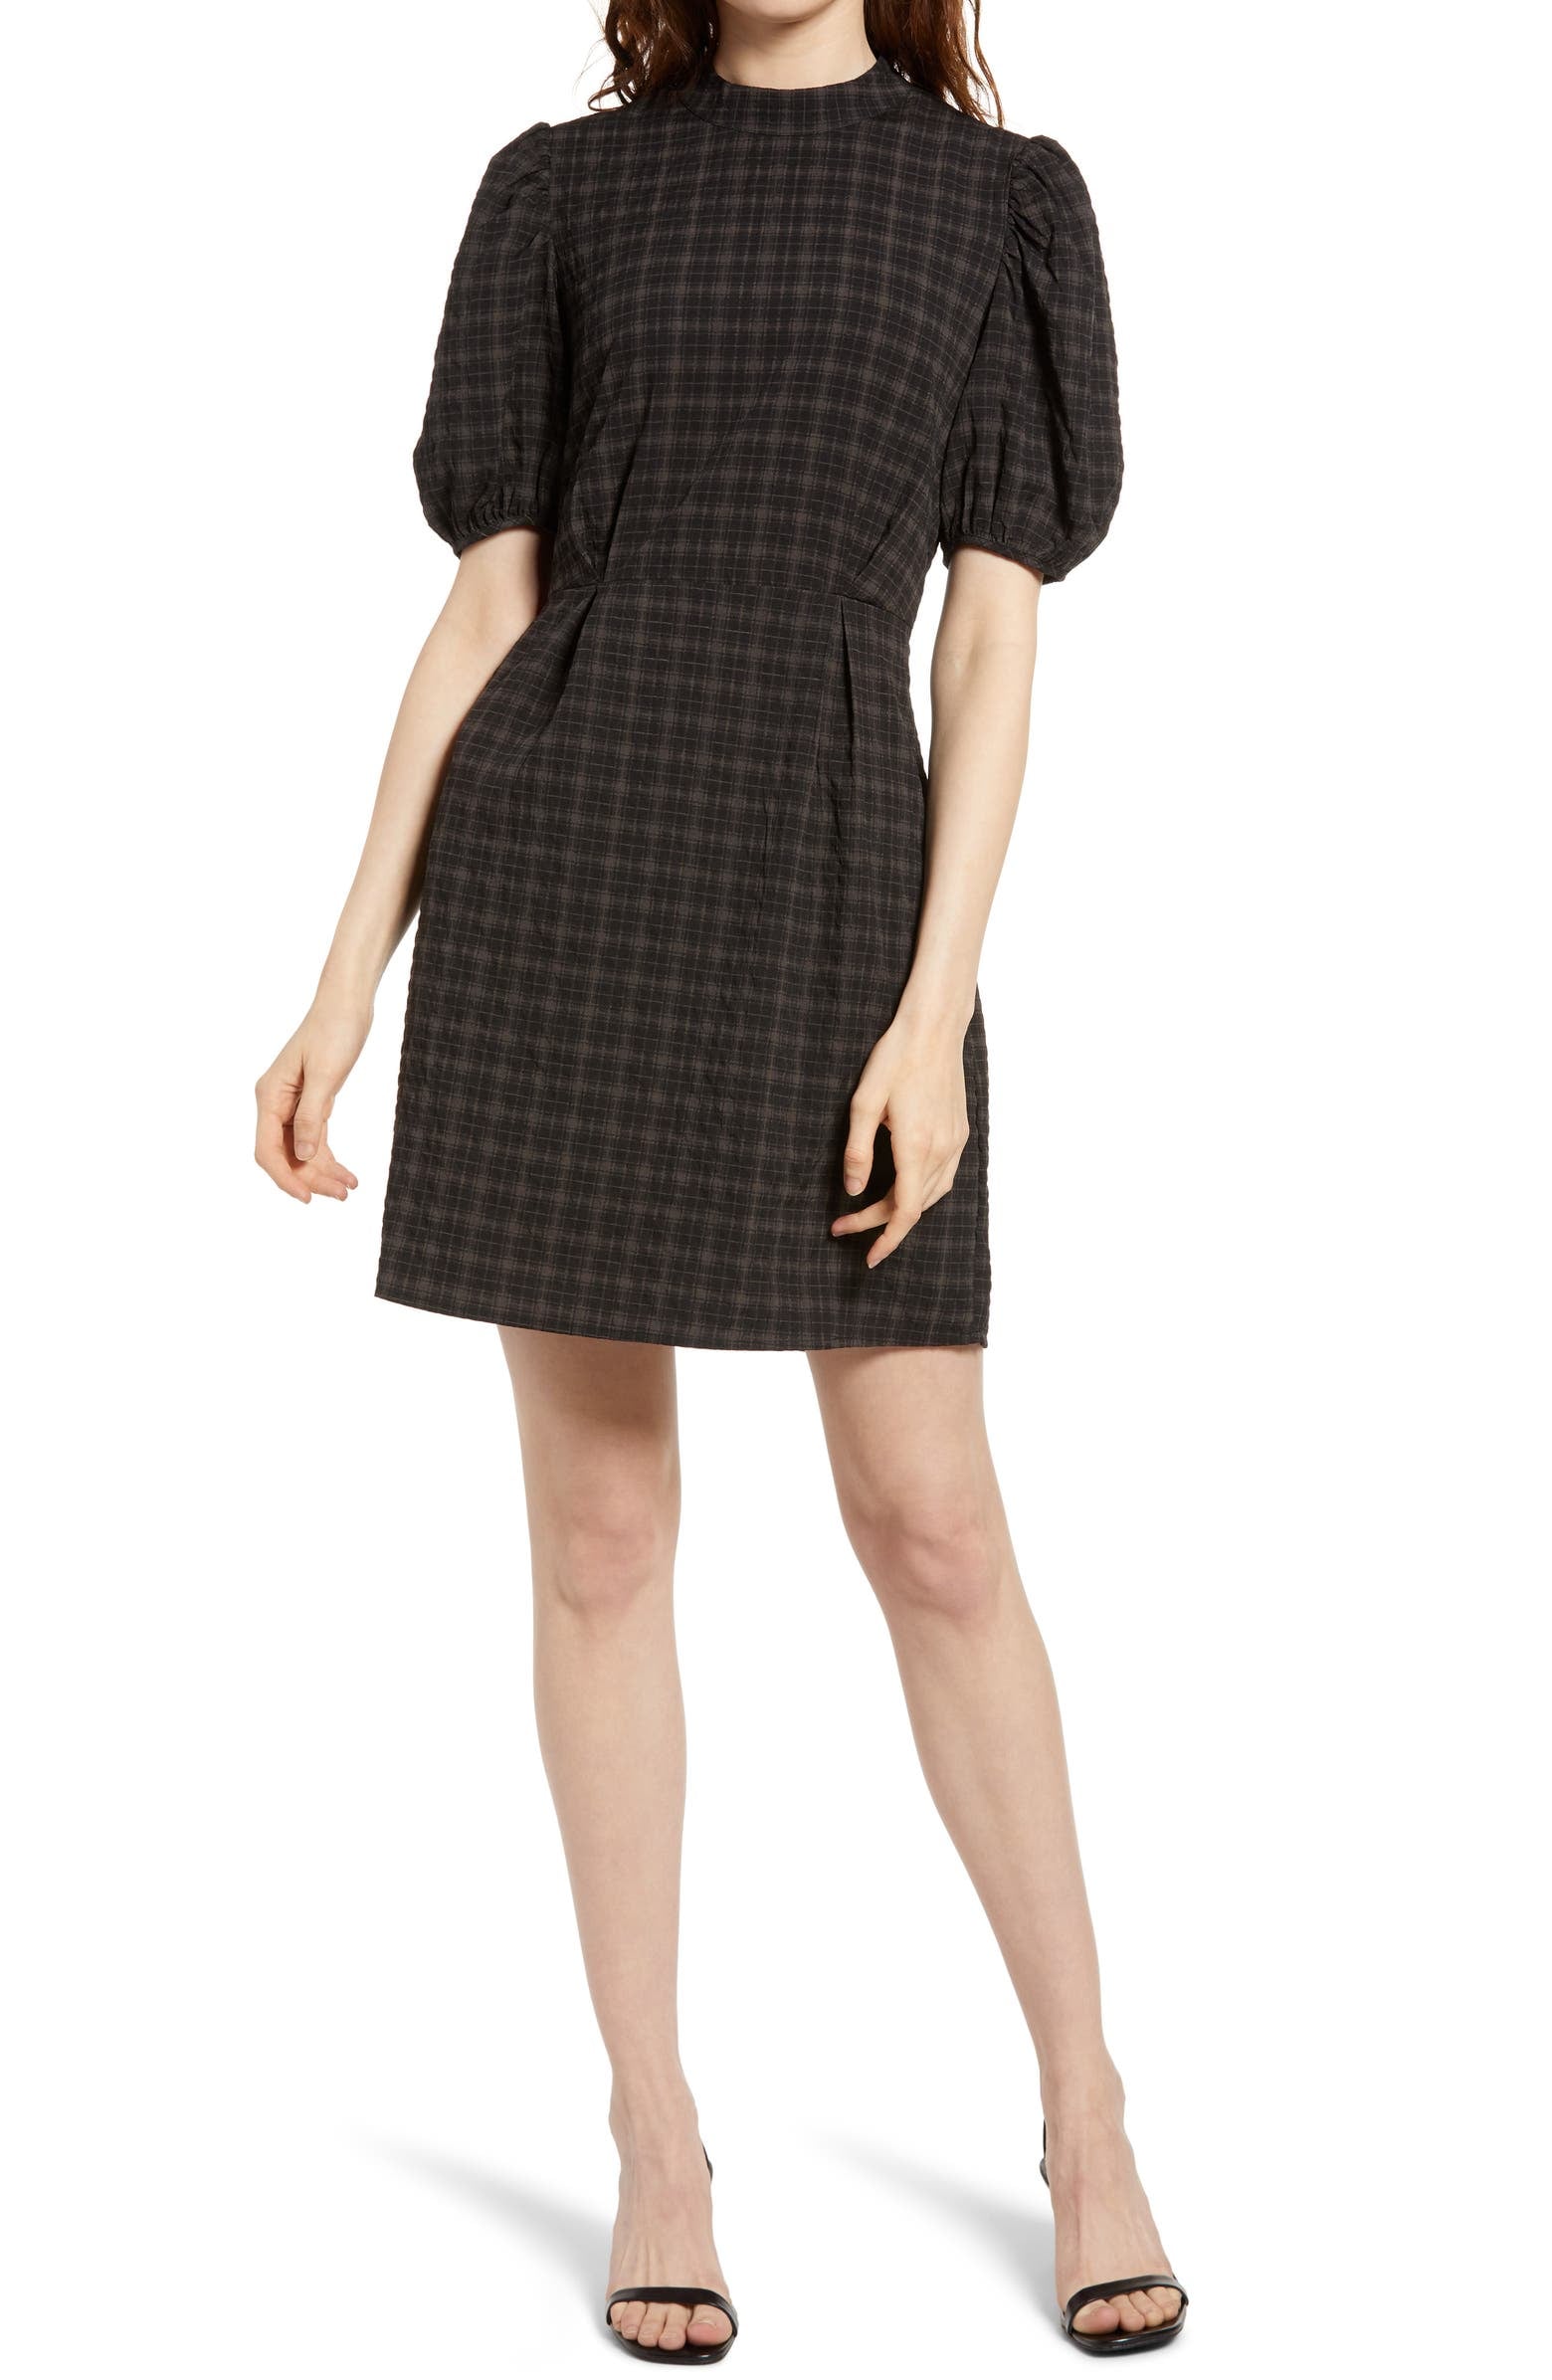 Aware By Vero Moda Maddie Plaid Puff Sleeve Dress | Nordstrom Has a Ton of Dresses on Sale, but These Are the Ones We're Buying ASAP | POPSUGAR 21